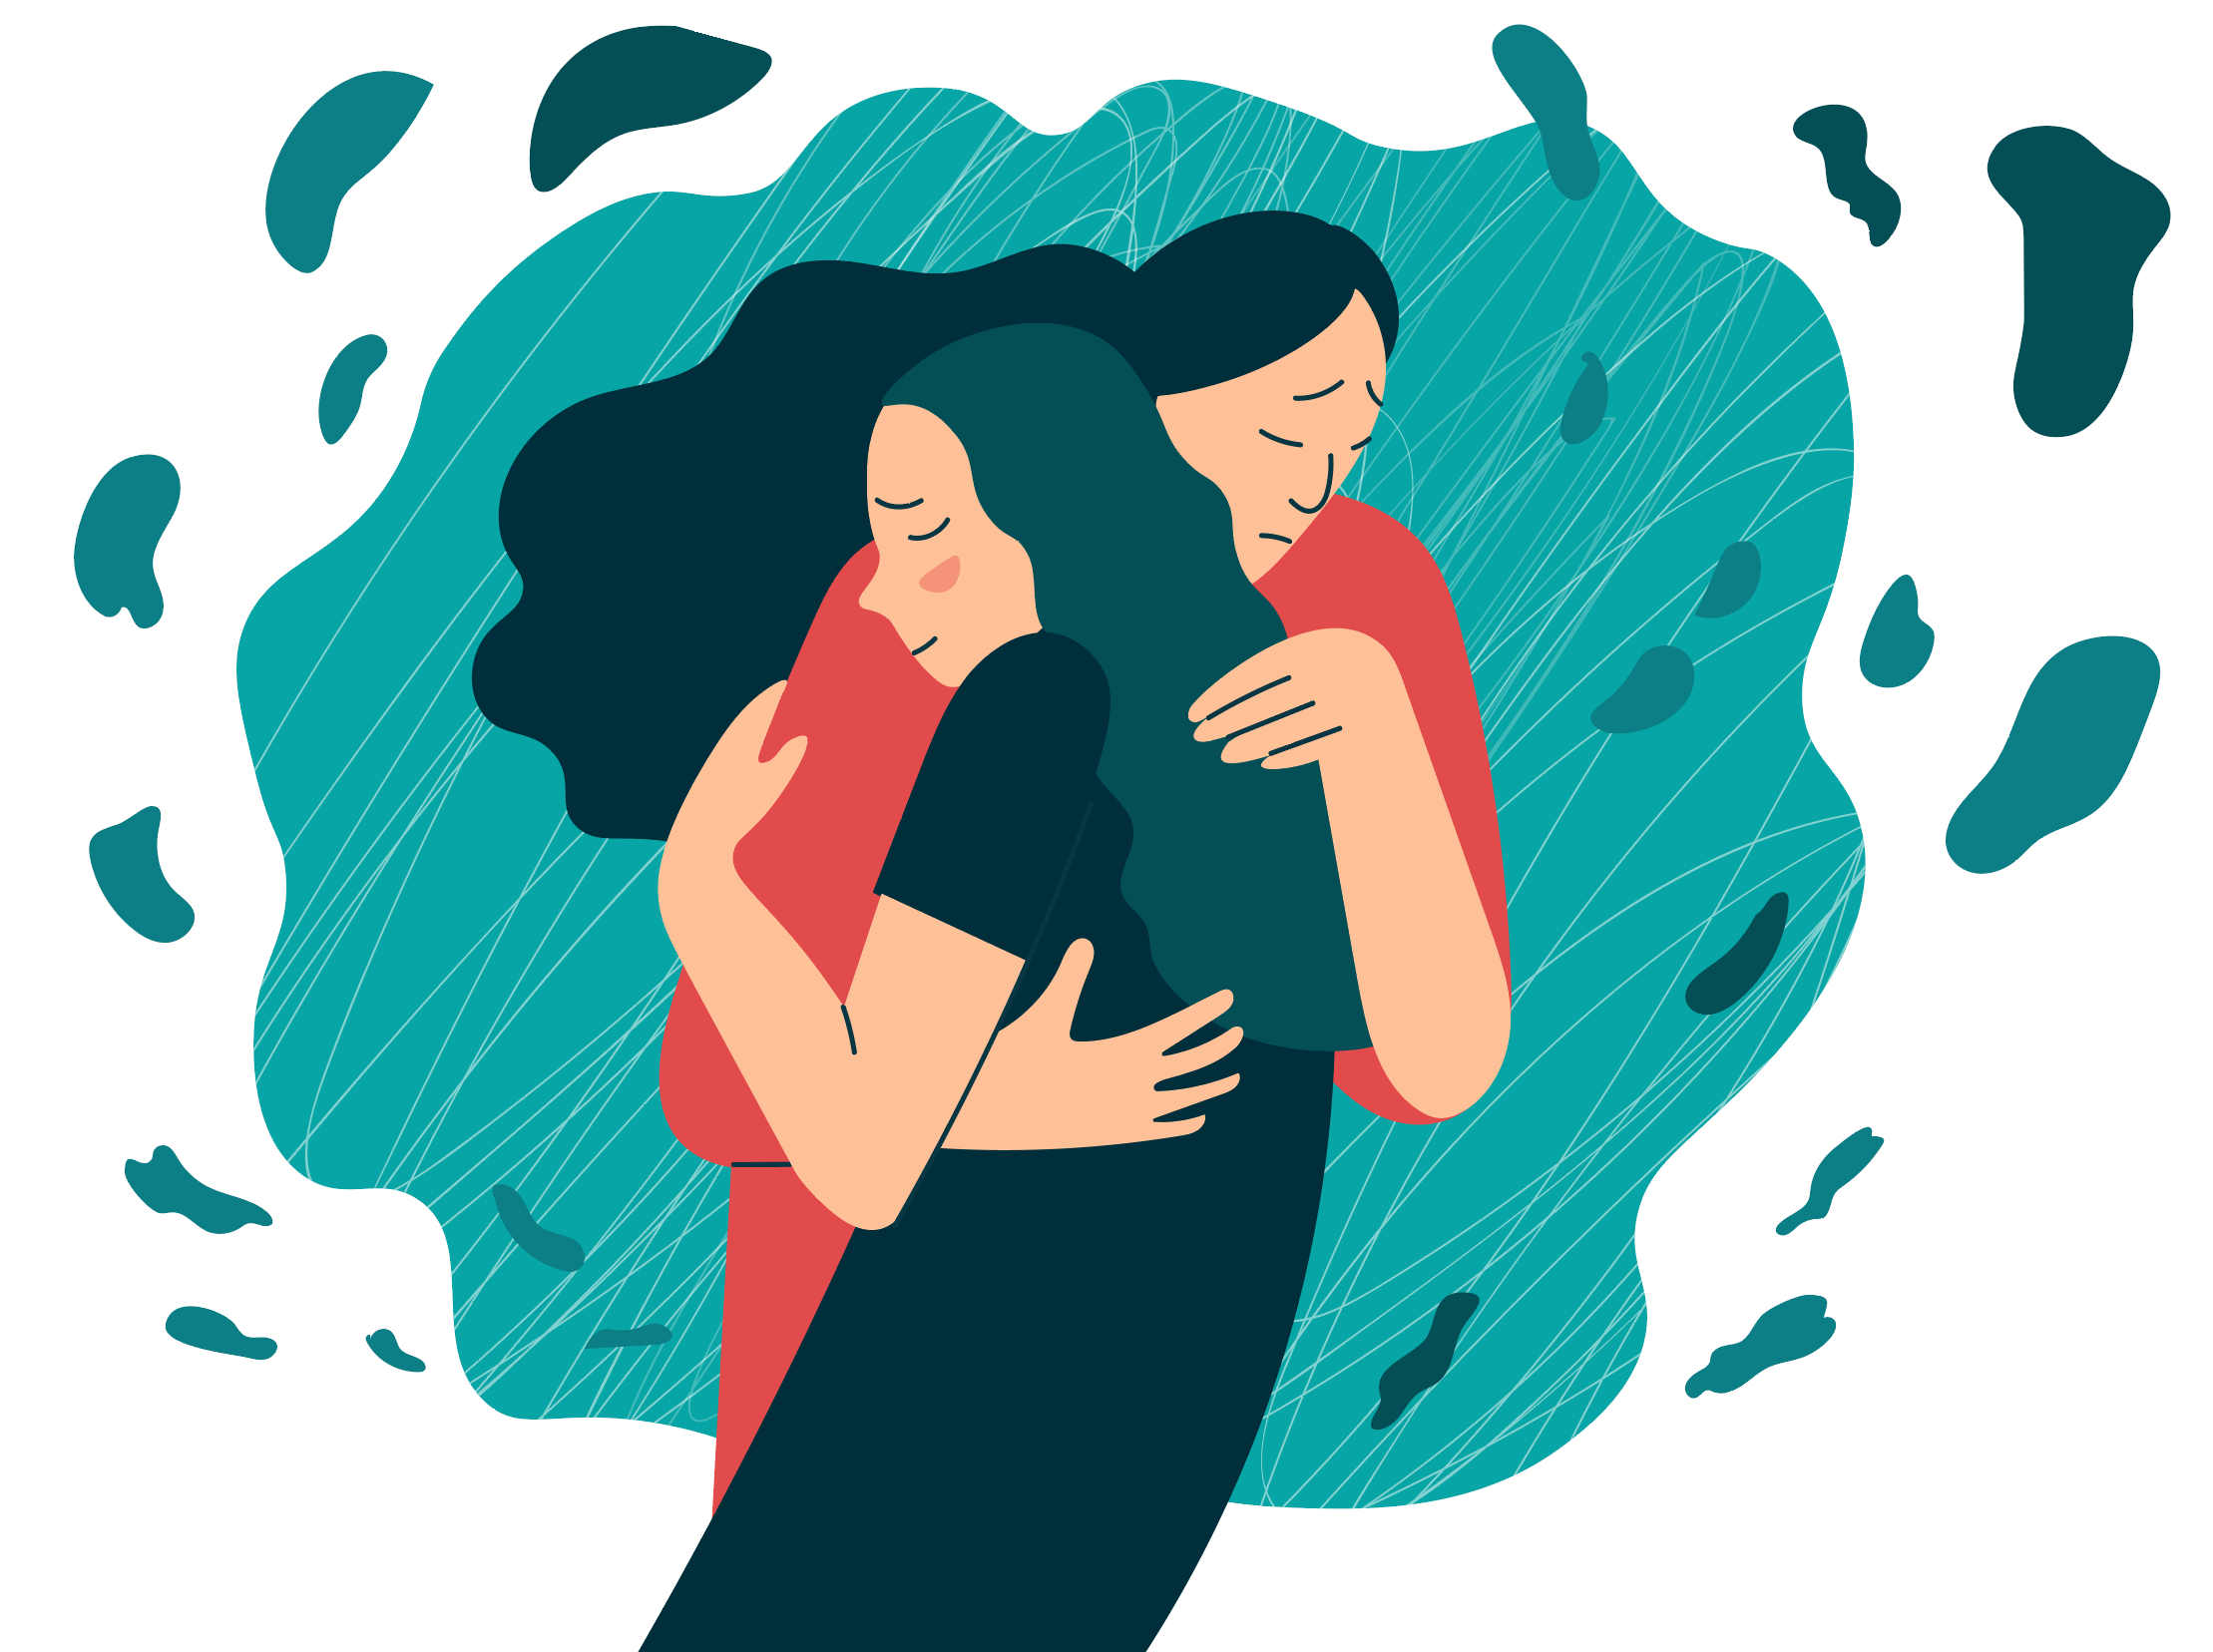 An illustration of a two women in a caring hug surrounded by abstract shapes.